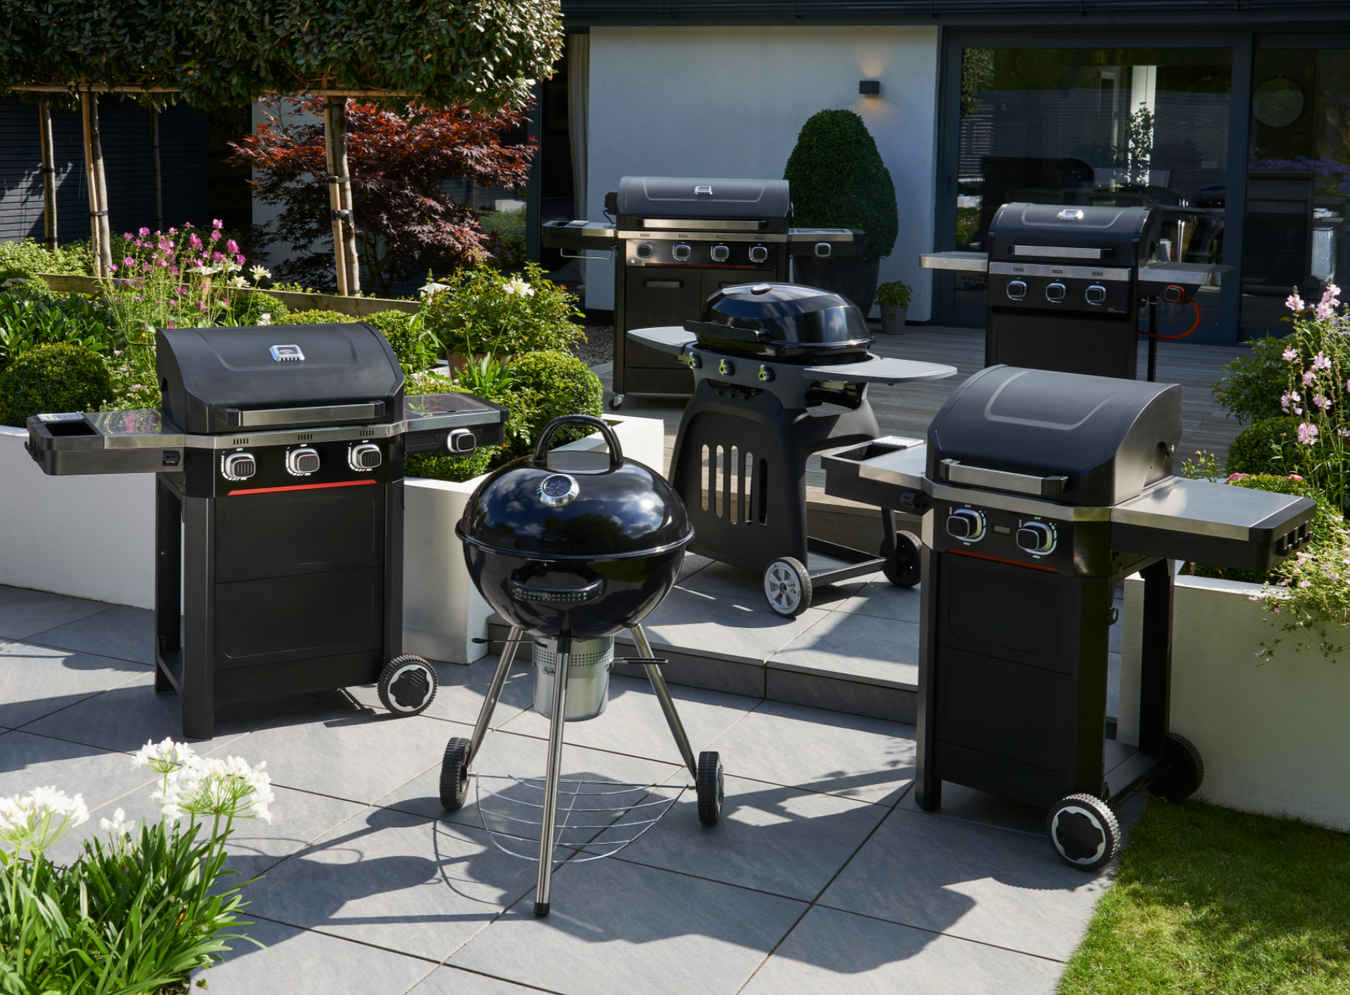 Outback Gas BBQ Barbecues - World of BBQs